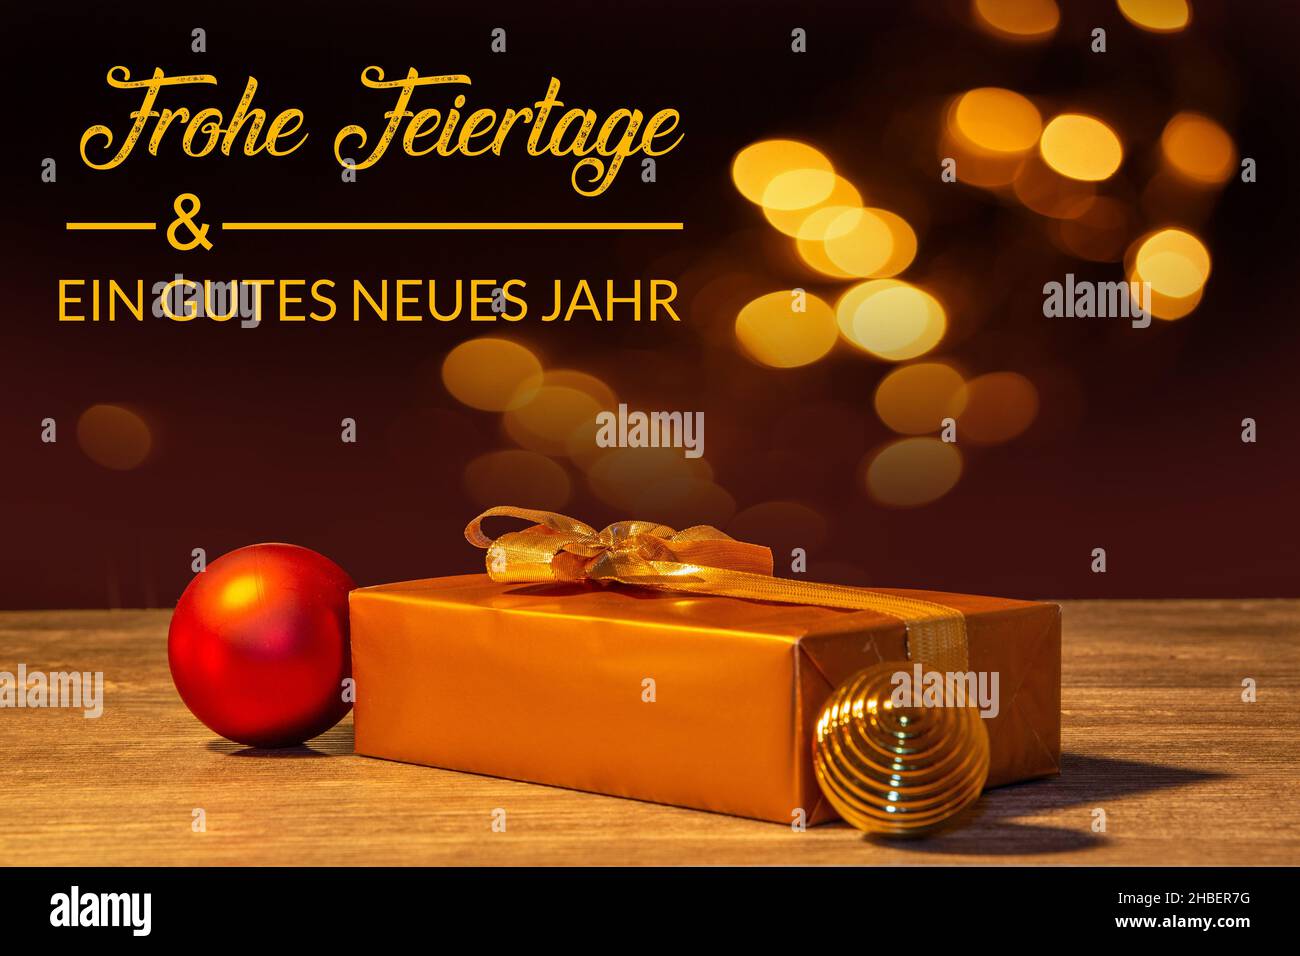 Christmas gift table with Christmas- and New Years greetings in german language Stock Photo